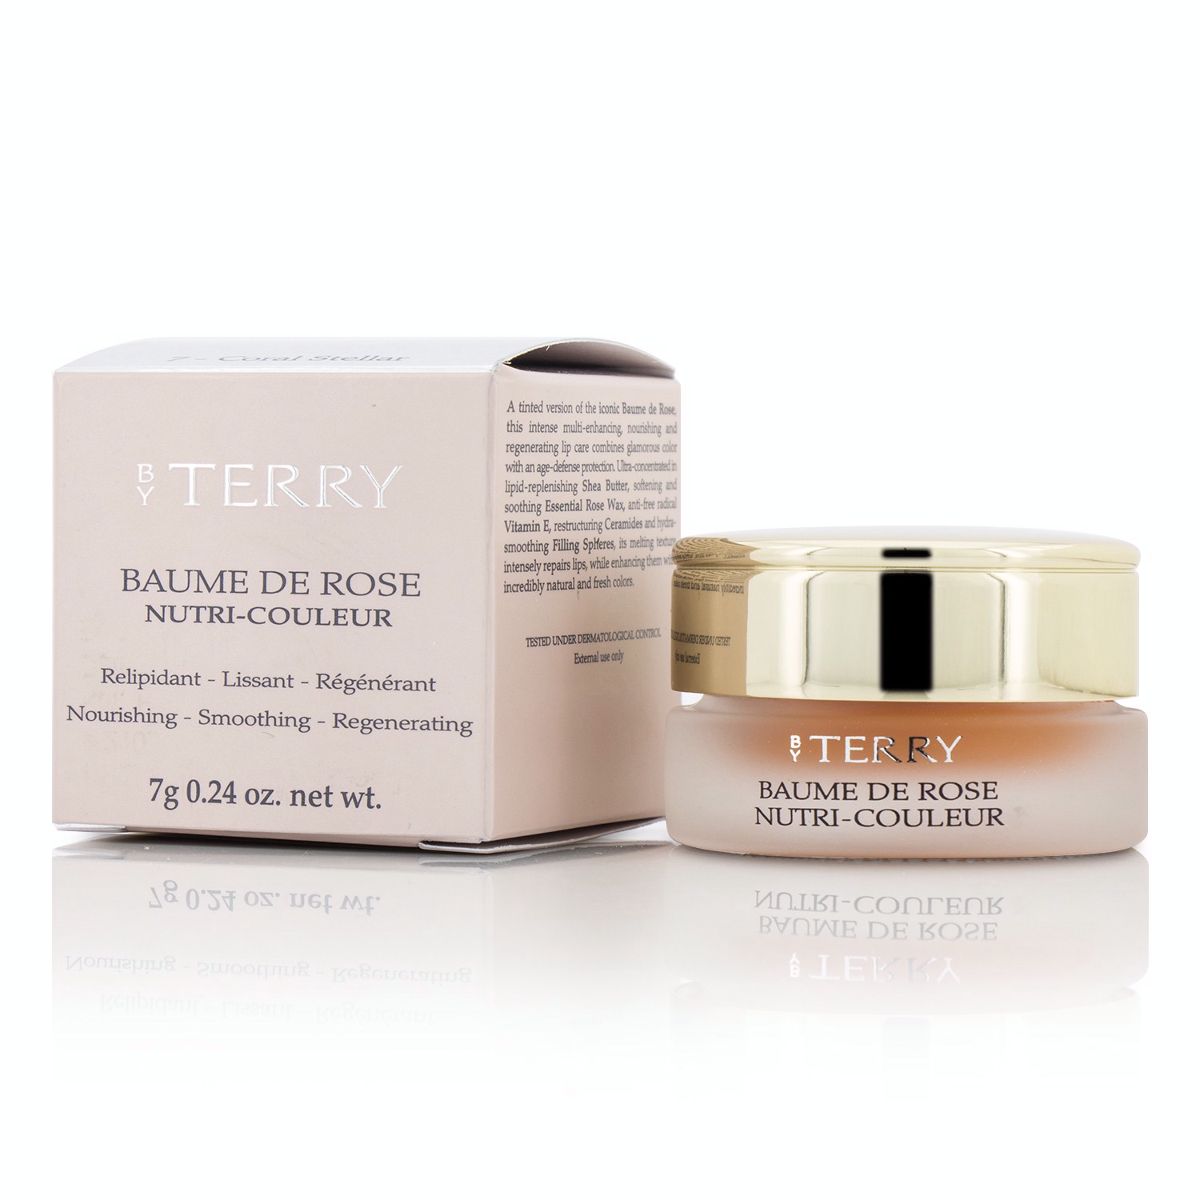 Baume de Rose Nutri Couleur - # 7 Coral Stellar By Terry Image